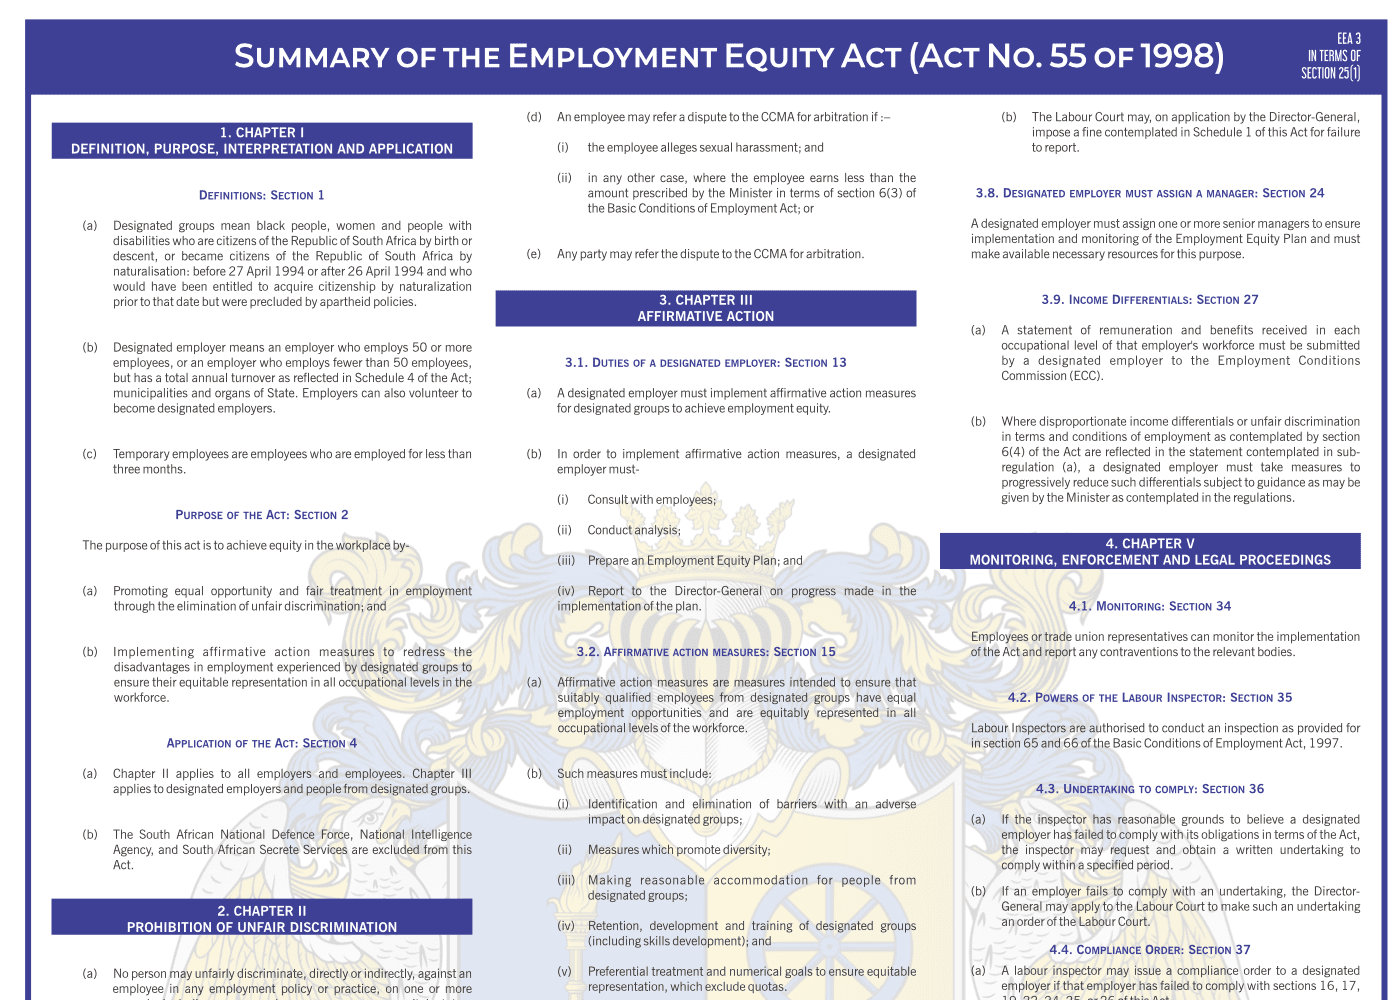 Employment Equity Act Summary (Act No.55 of 1998) Poster_A1